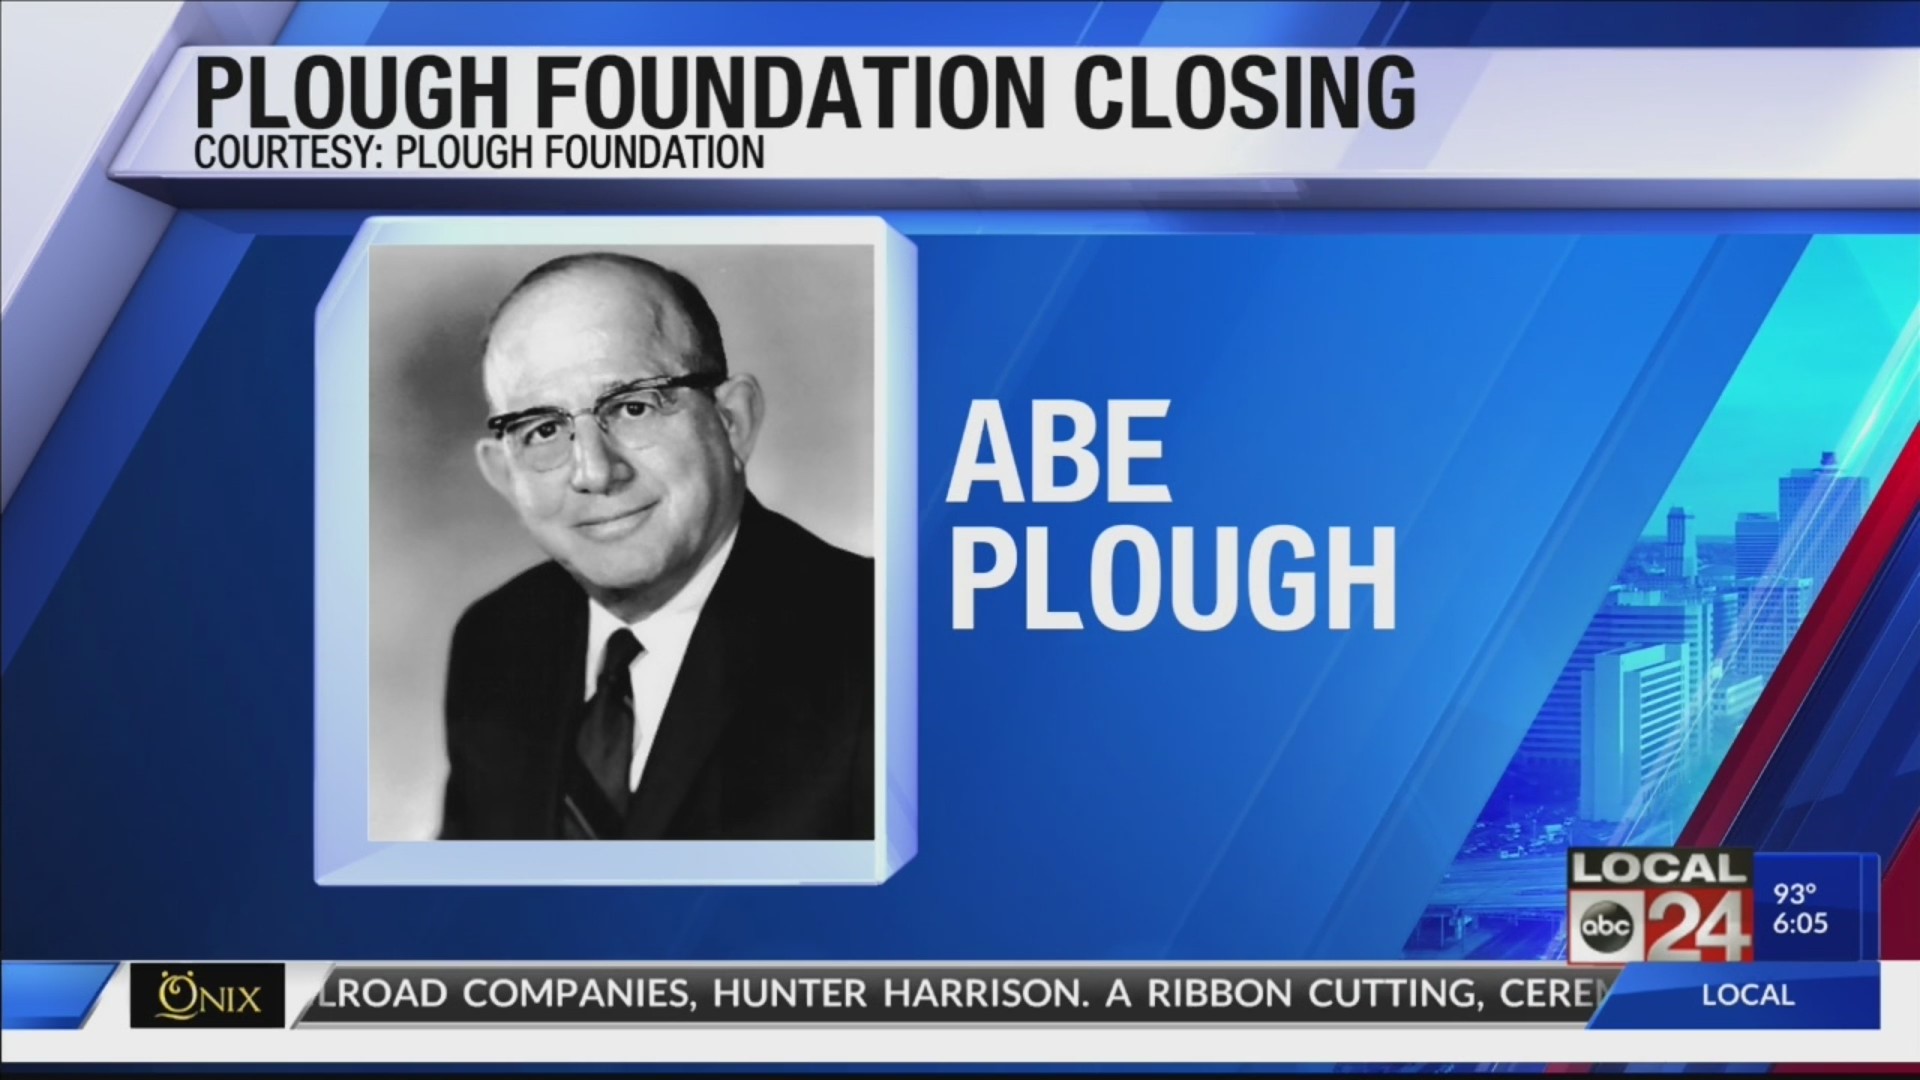 Plough Foundation to cease operations within four years